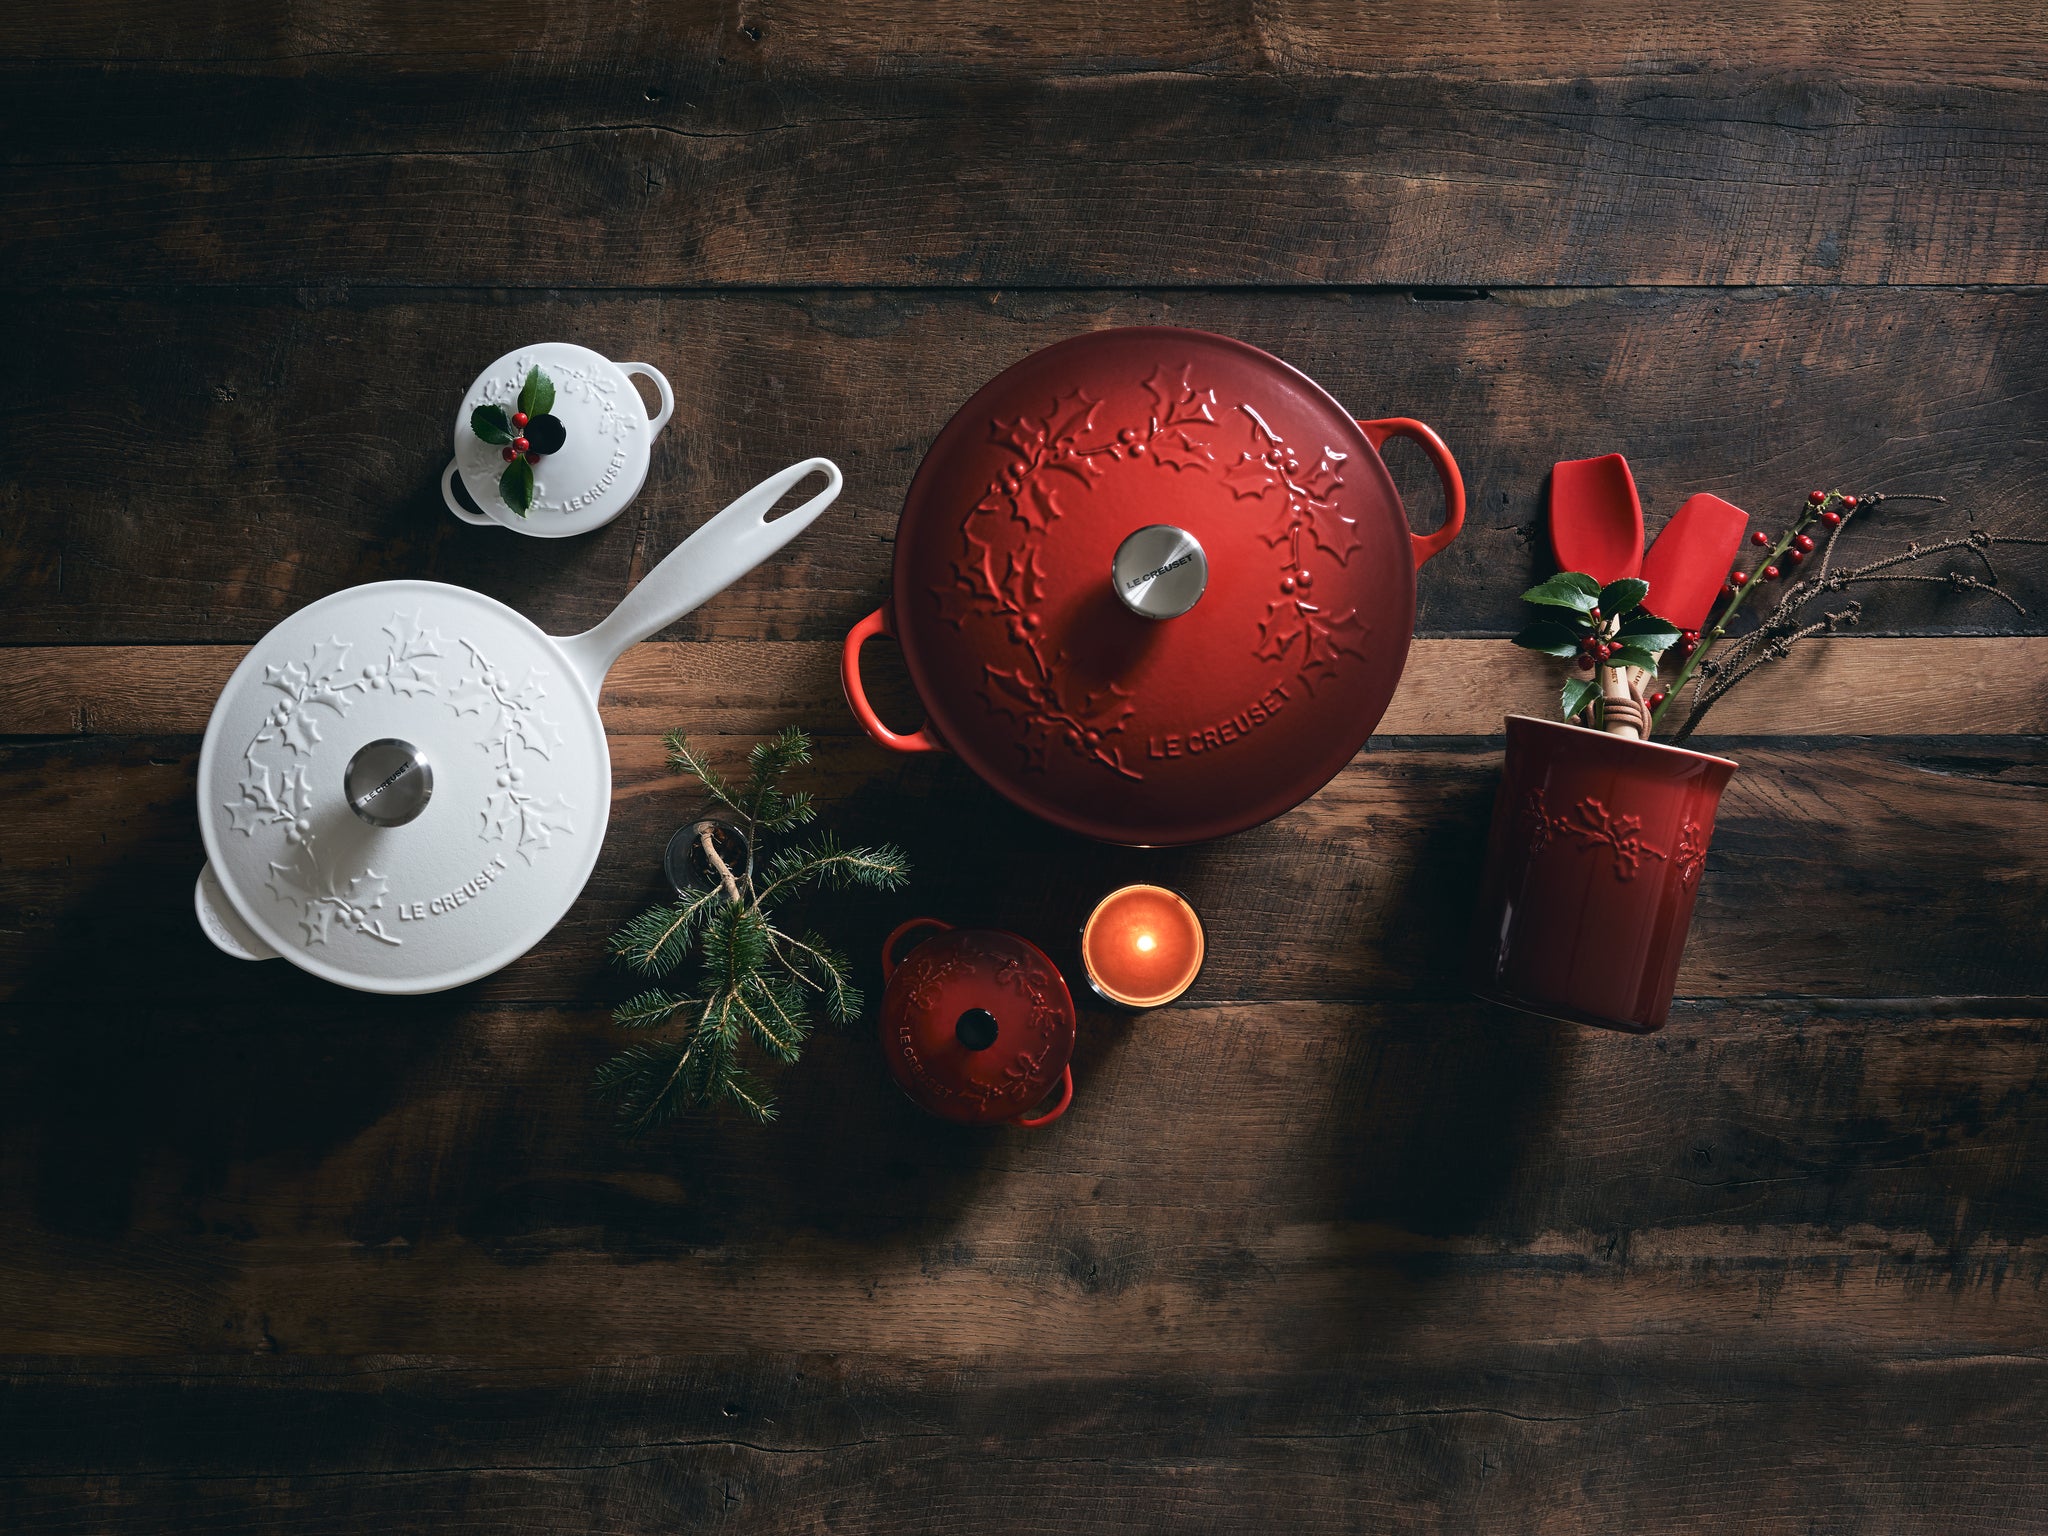 Le Creuset launches limited edition cookware range for a classy